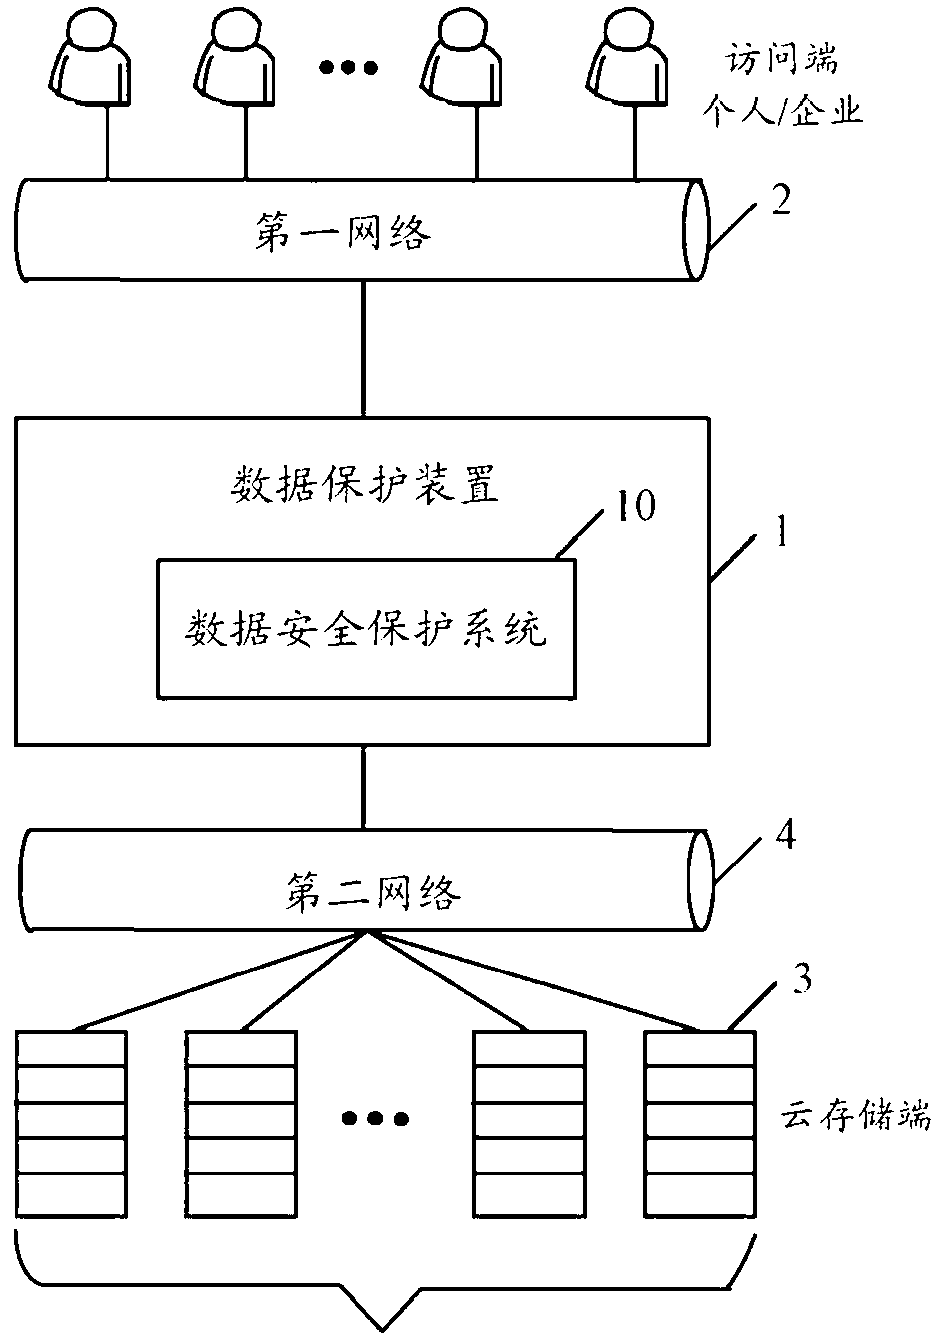 Cloud storage-based data security protection system and method